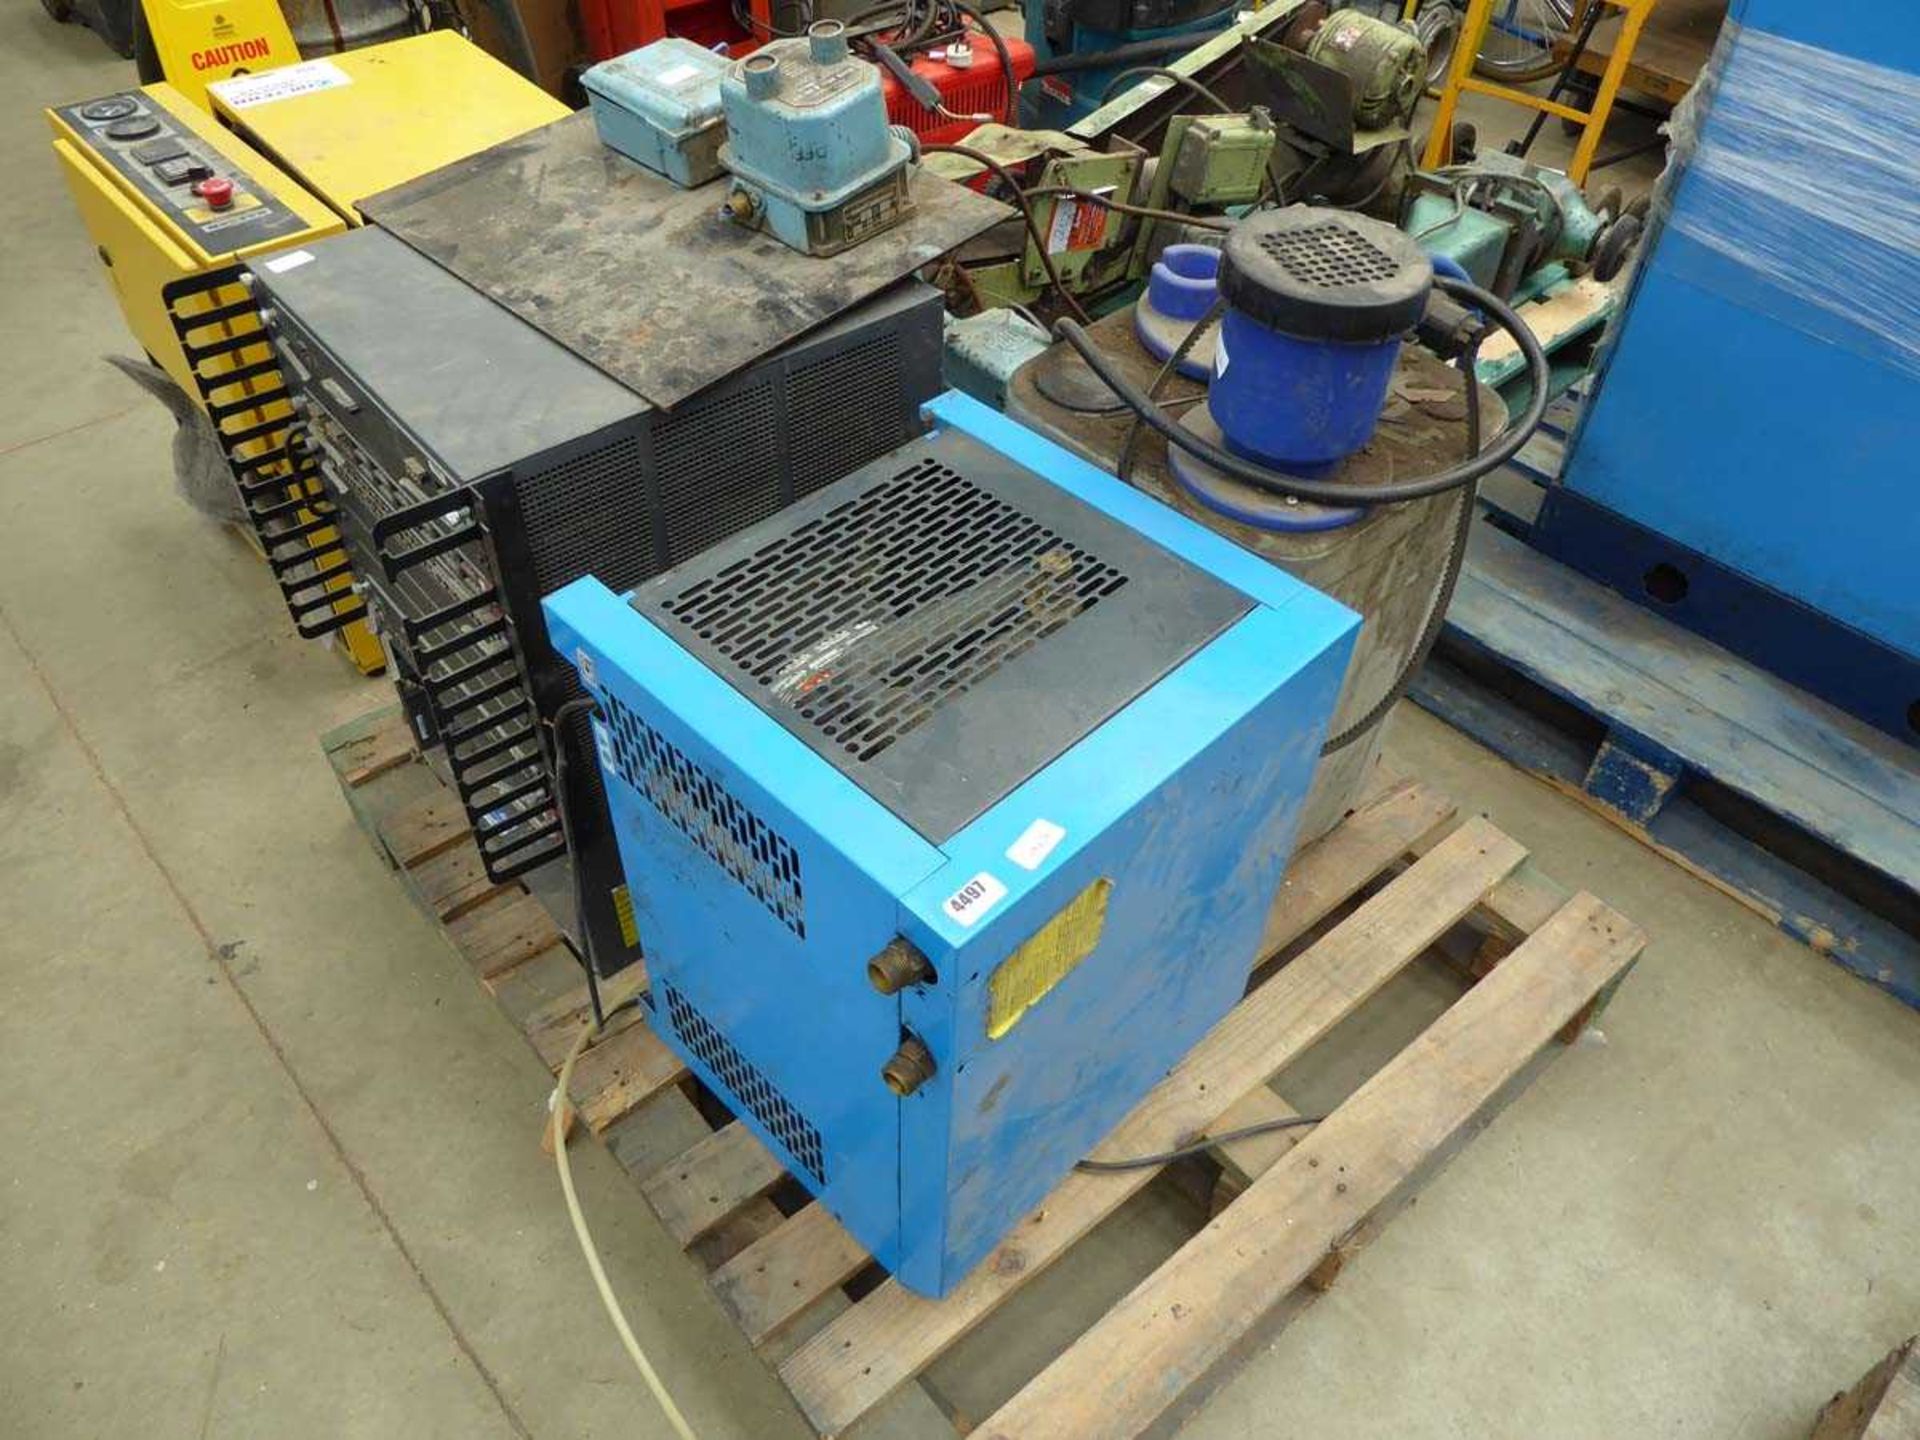 Pallet containing machine parts and motors